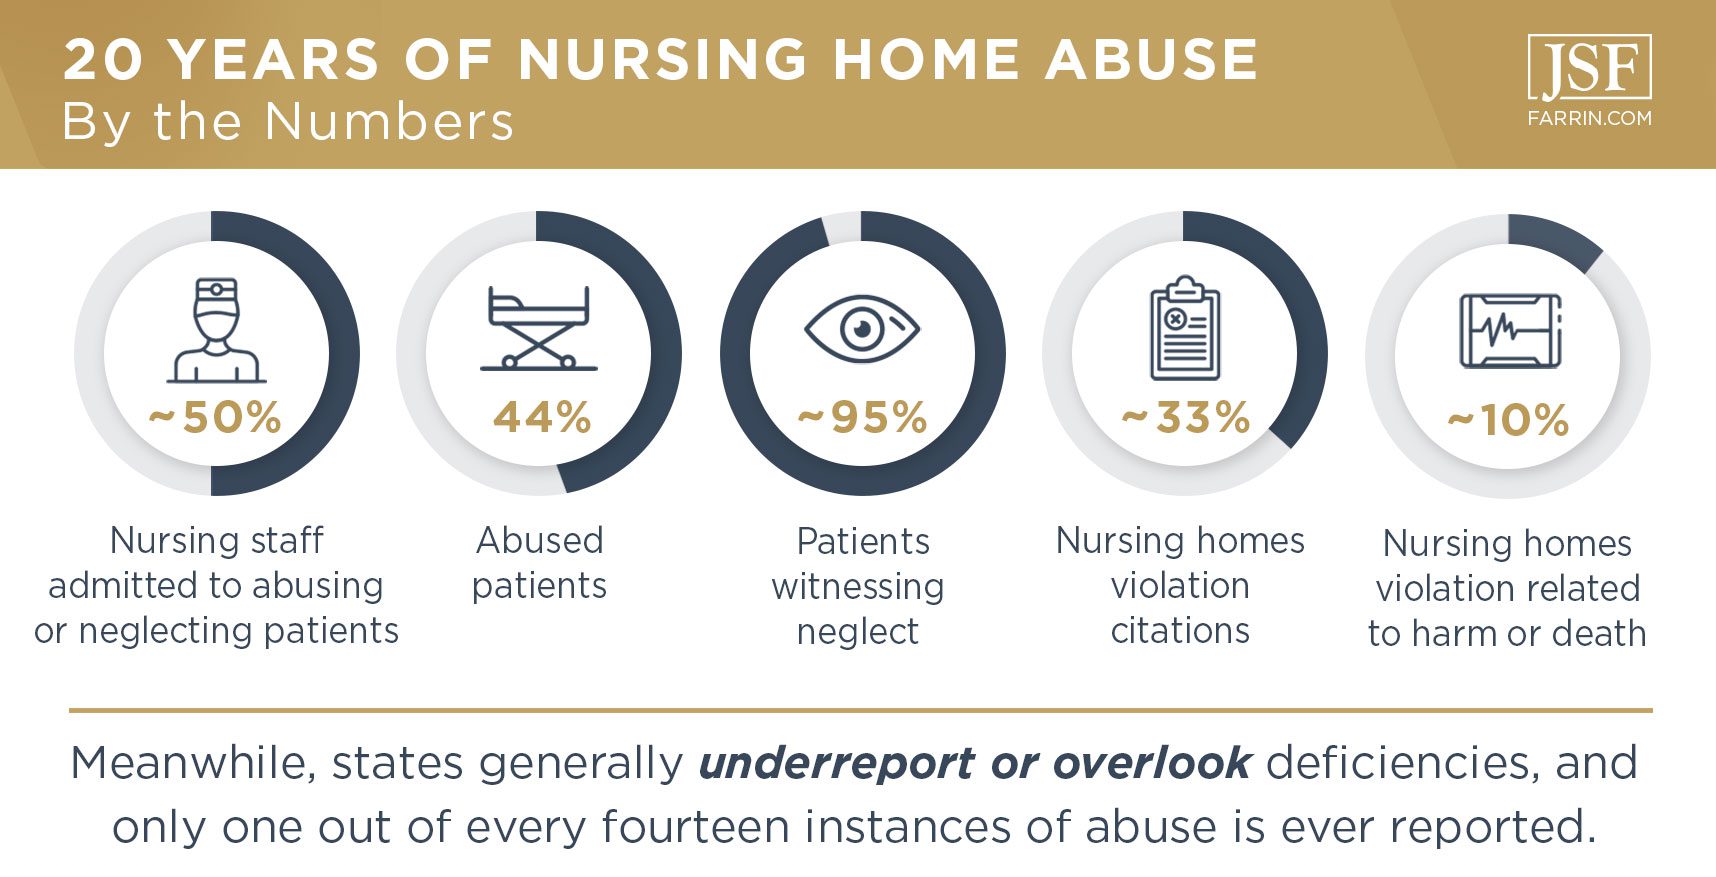 Stats on nursing home abuse. States usually underreport or overlook deficiencies.